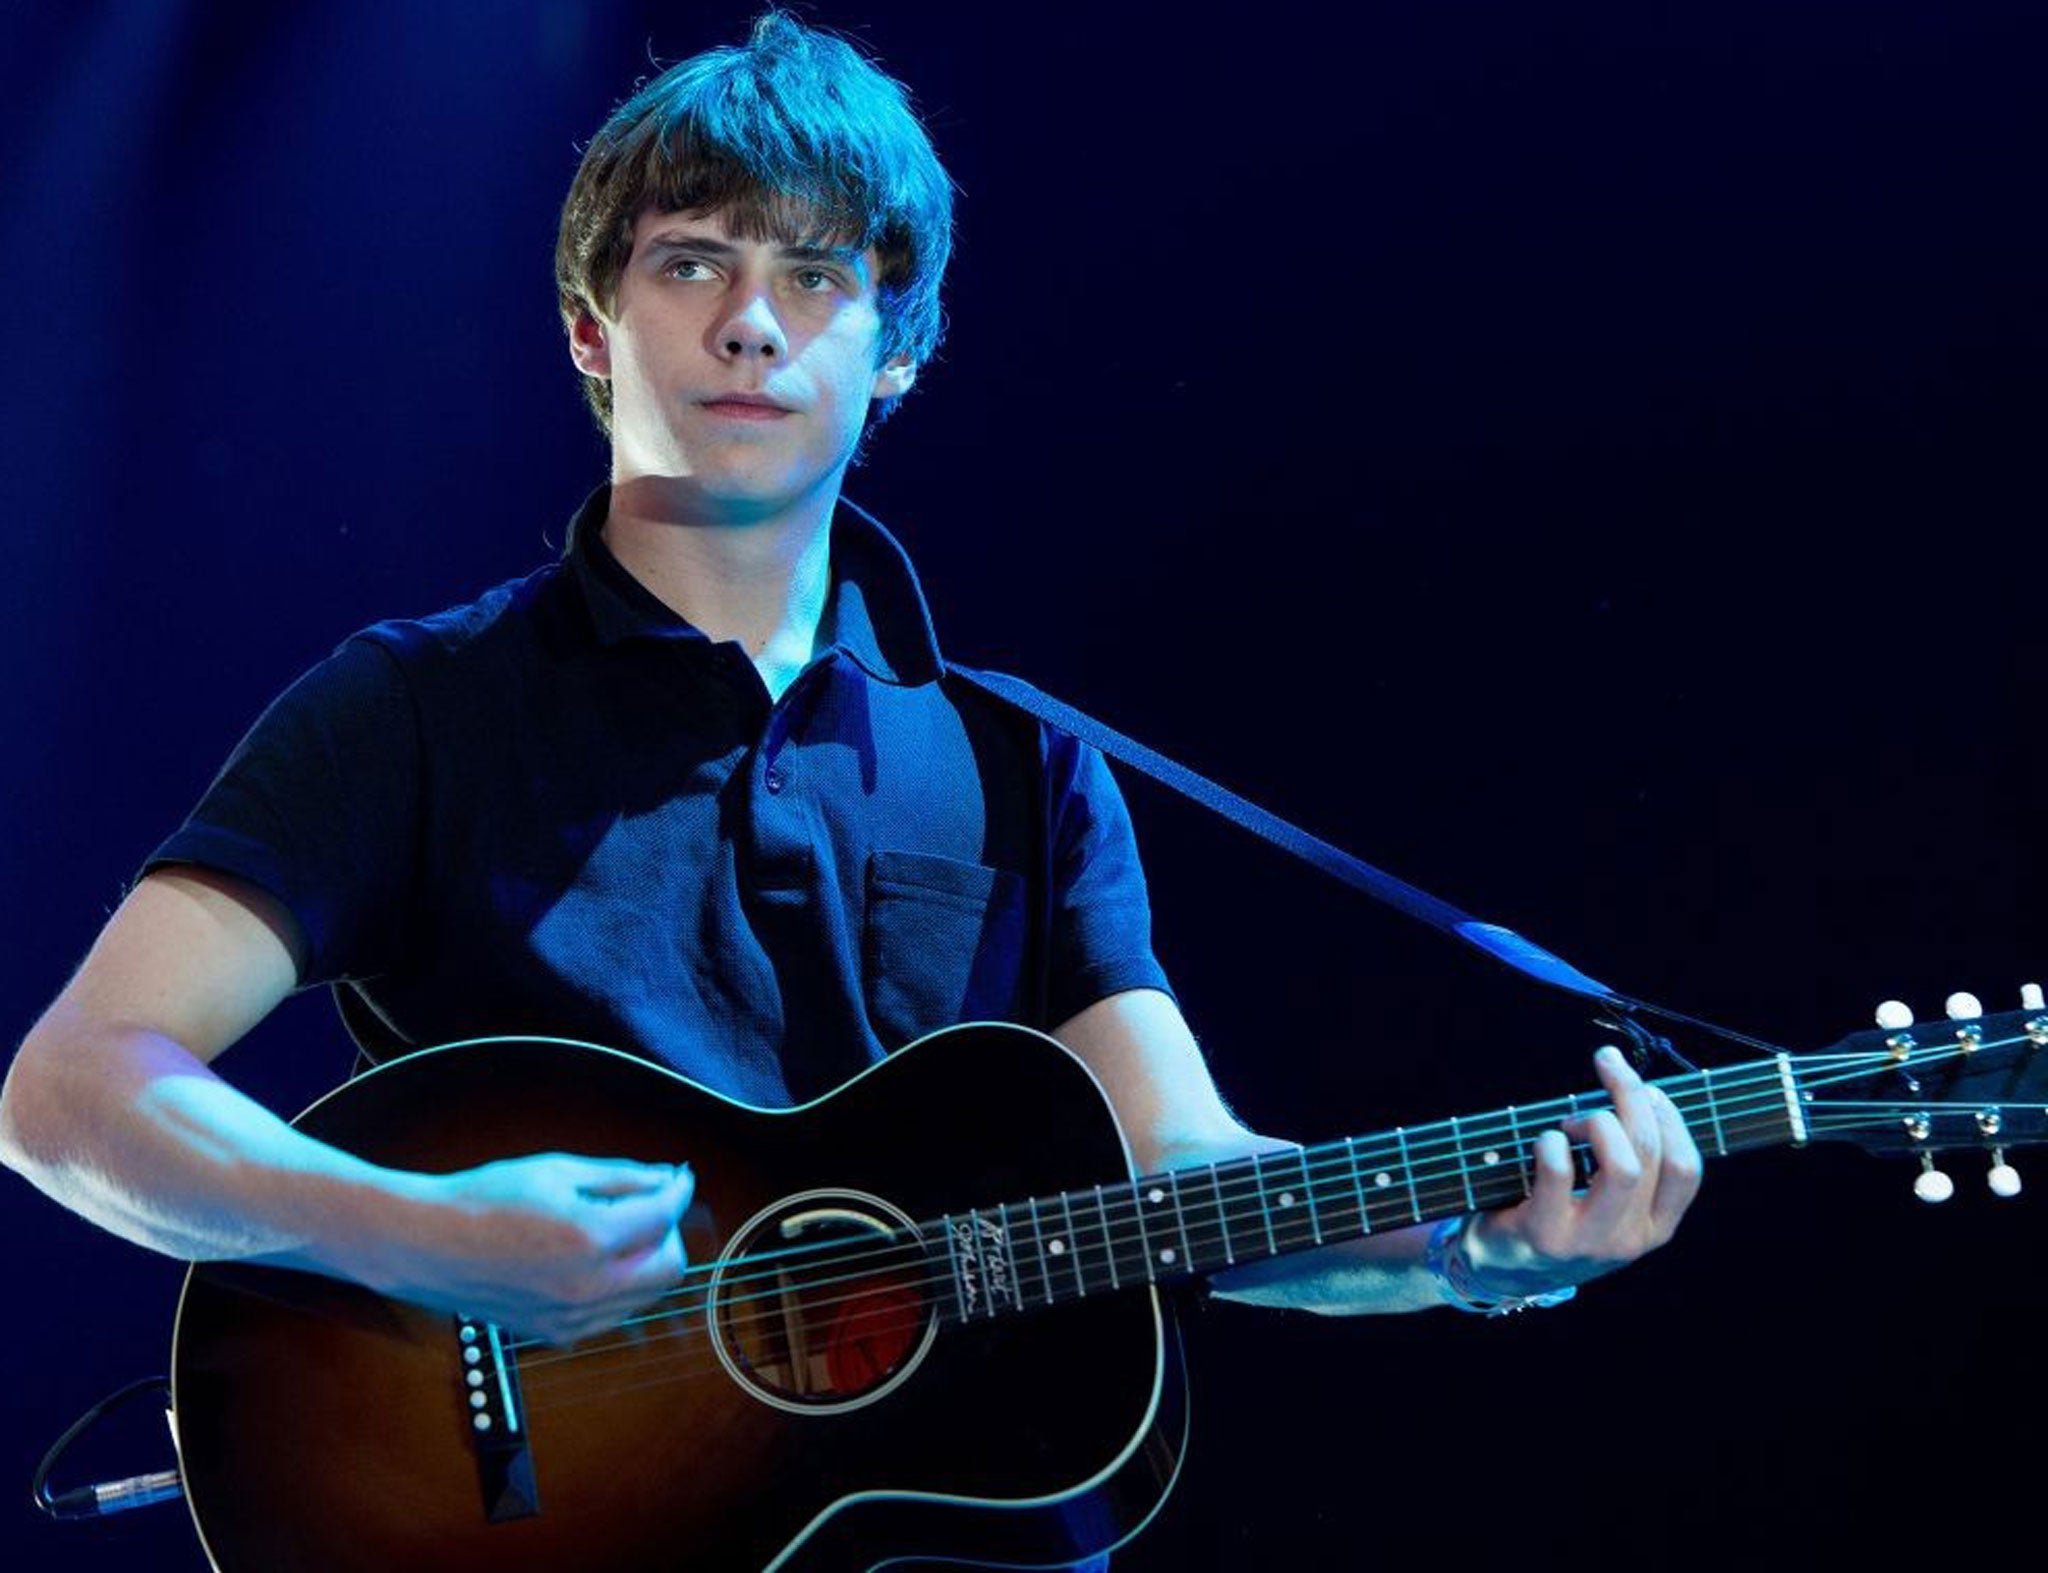 Jake Bugg is promoting his music in America